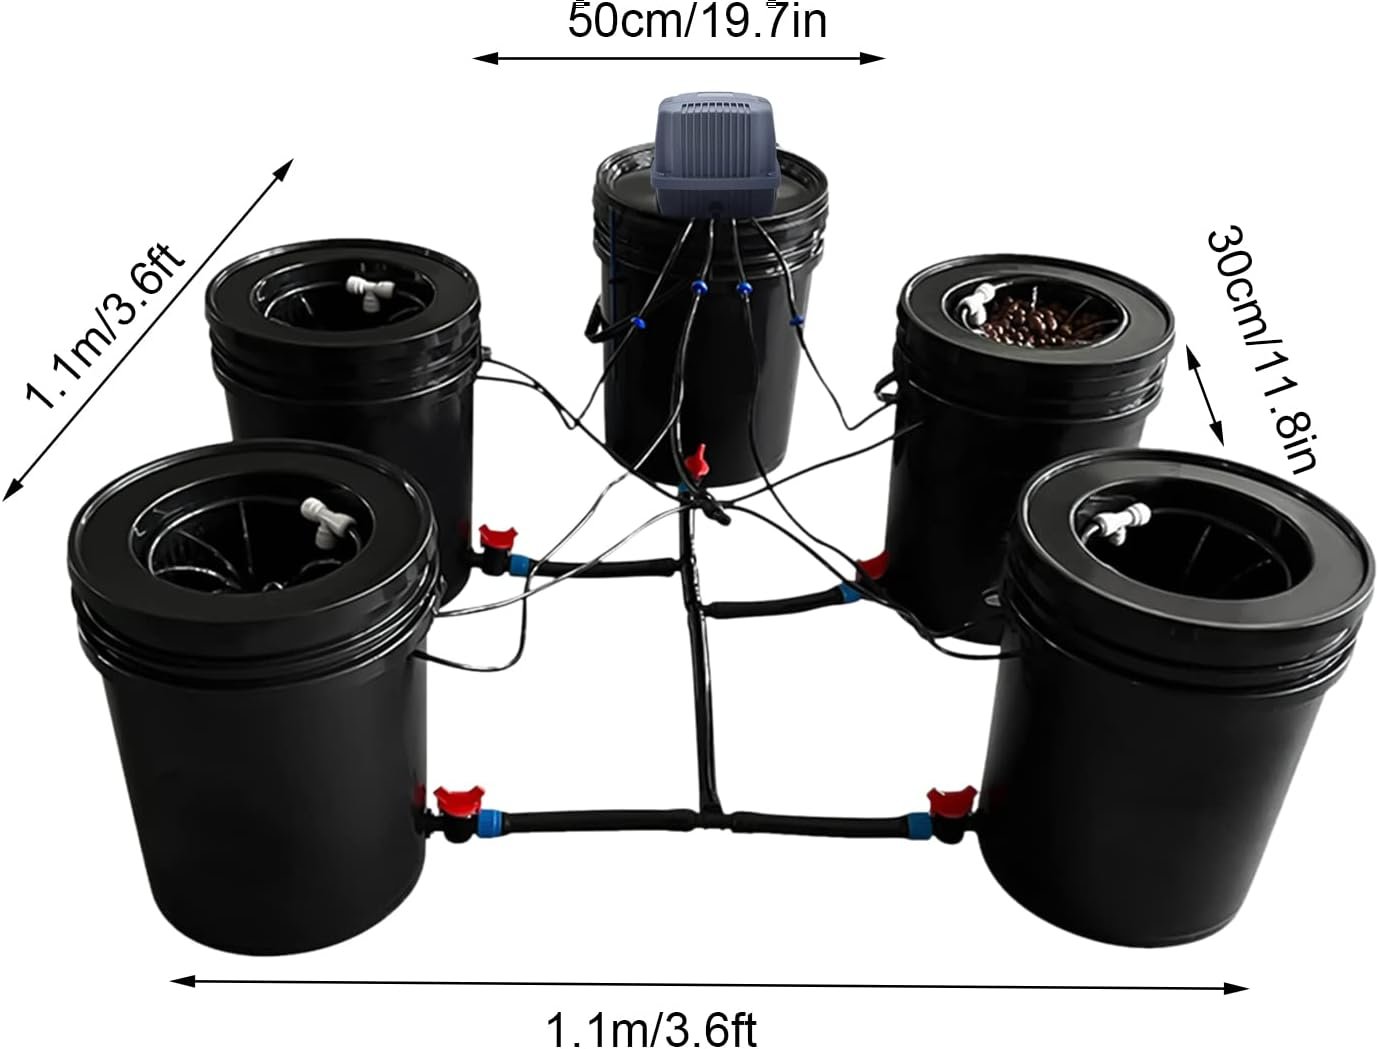 Hydroponics Growing System 5 Gallon 5 Buckets w/Reservoir Kit Deep Water Culture Growing Bucket Plant Multi Barrel Hydroponic Machine Drip Irrigation System for Indoor Outdoor Leafy Vegetables